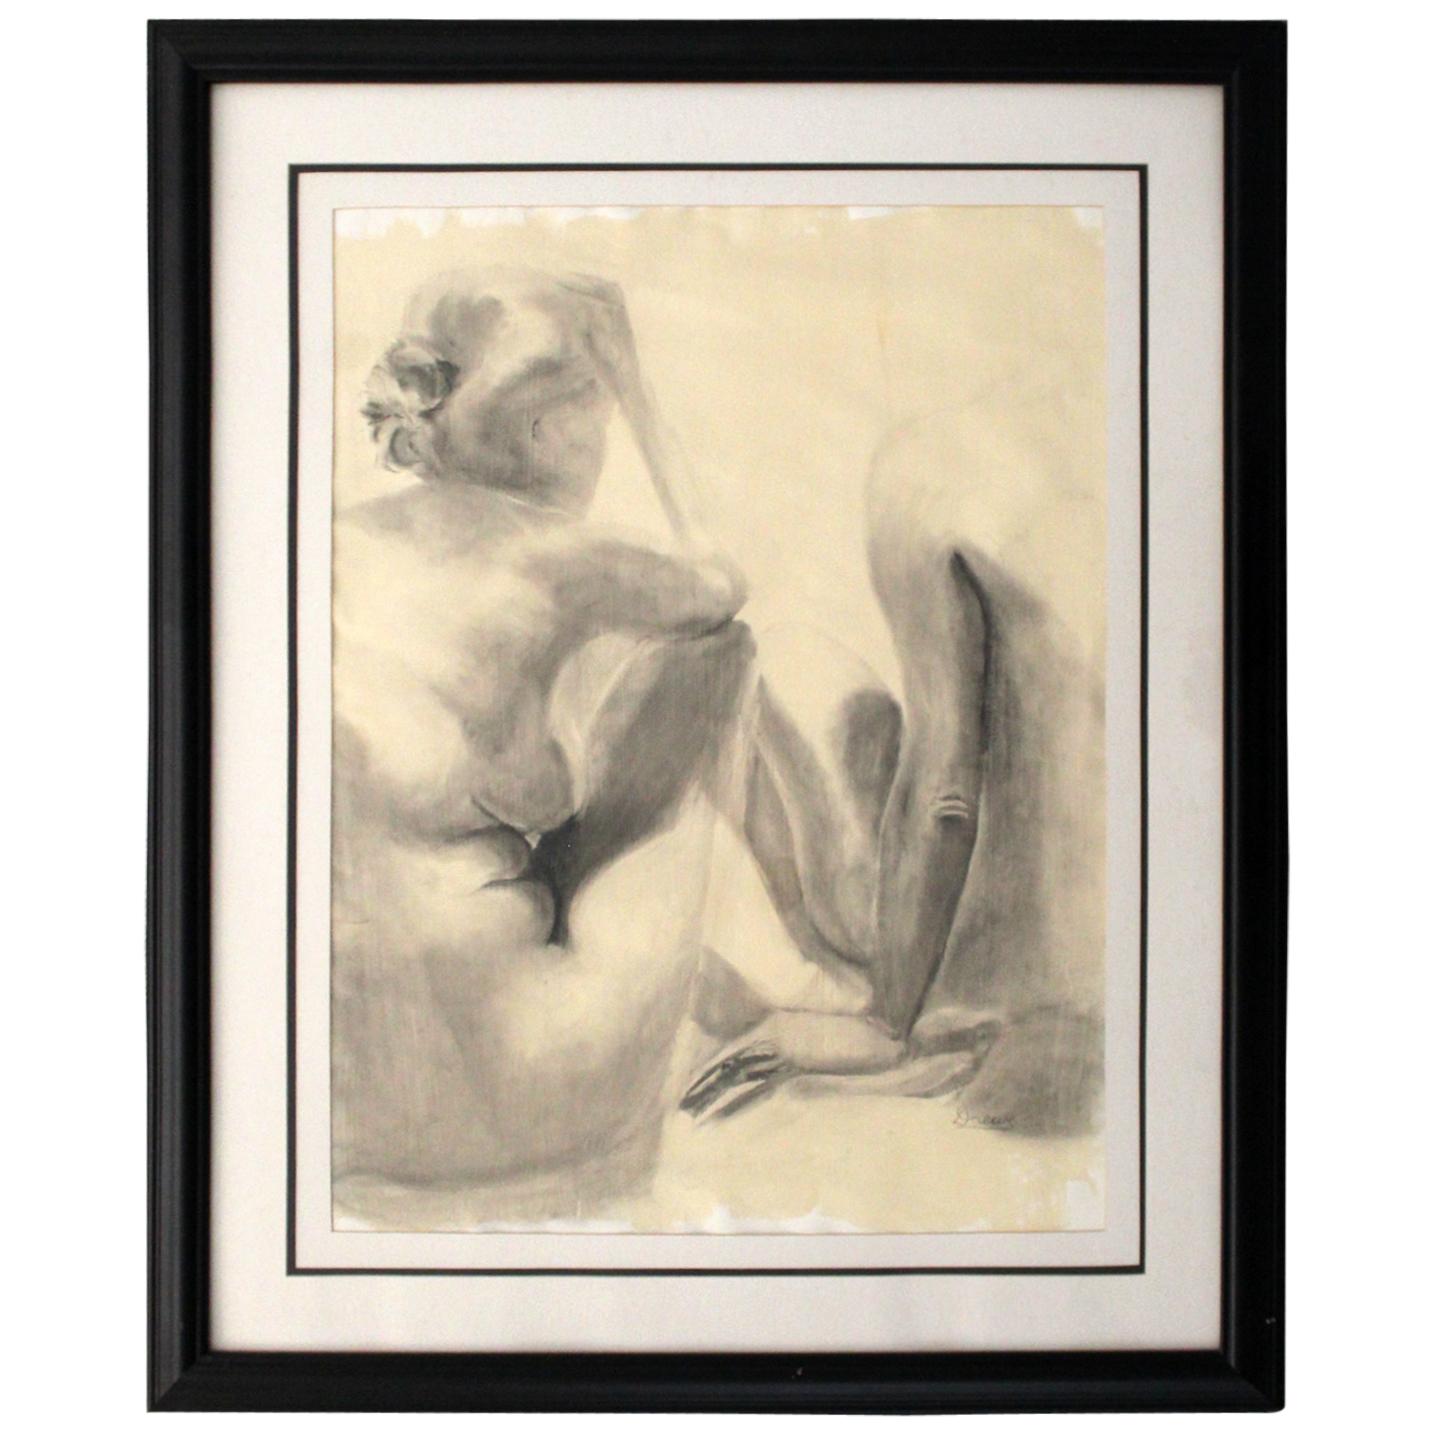 Contemporary Modern Framed Charcoal Drawing Signed Drewe Nude Figure Drawing